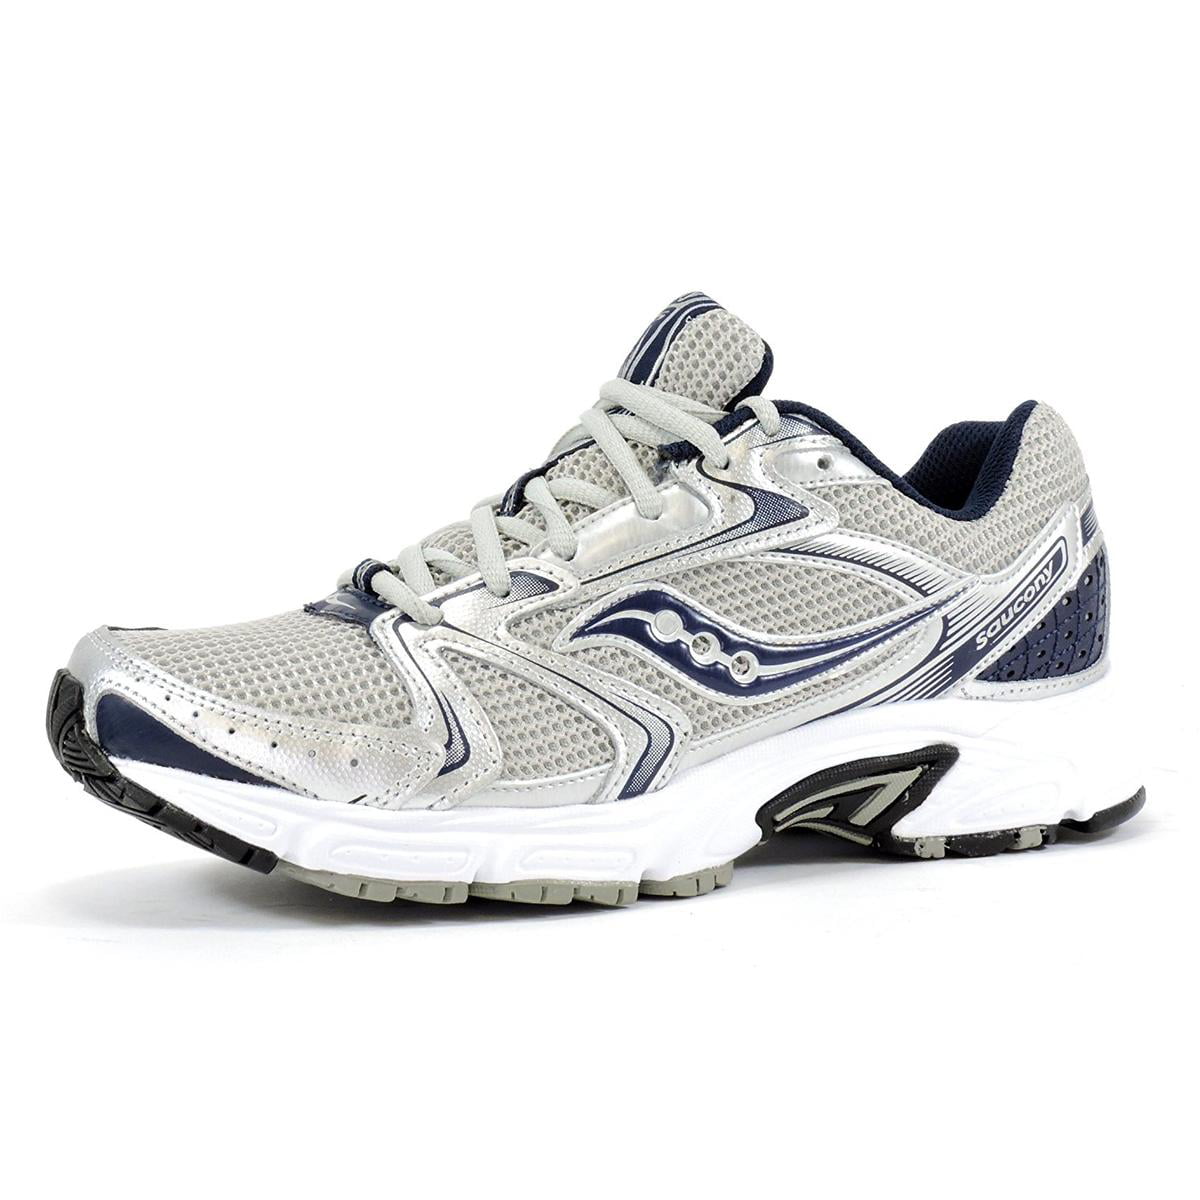 Saucony Running and Jogging Shoes Price Guide | The FitnessView